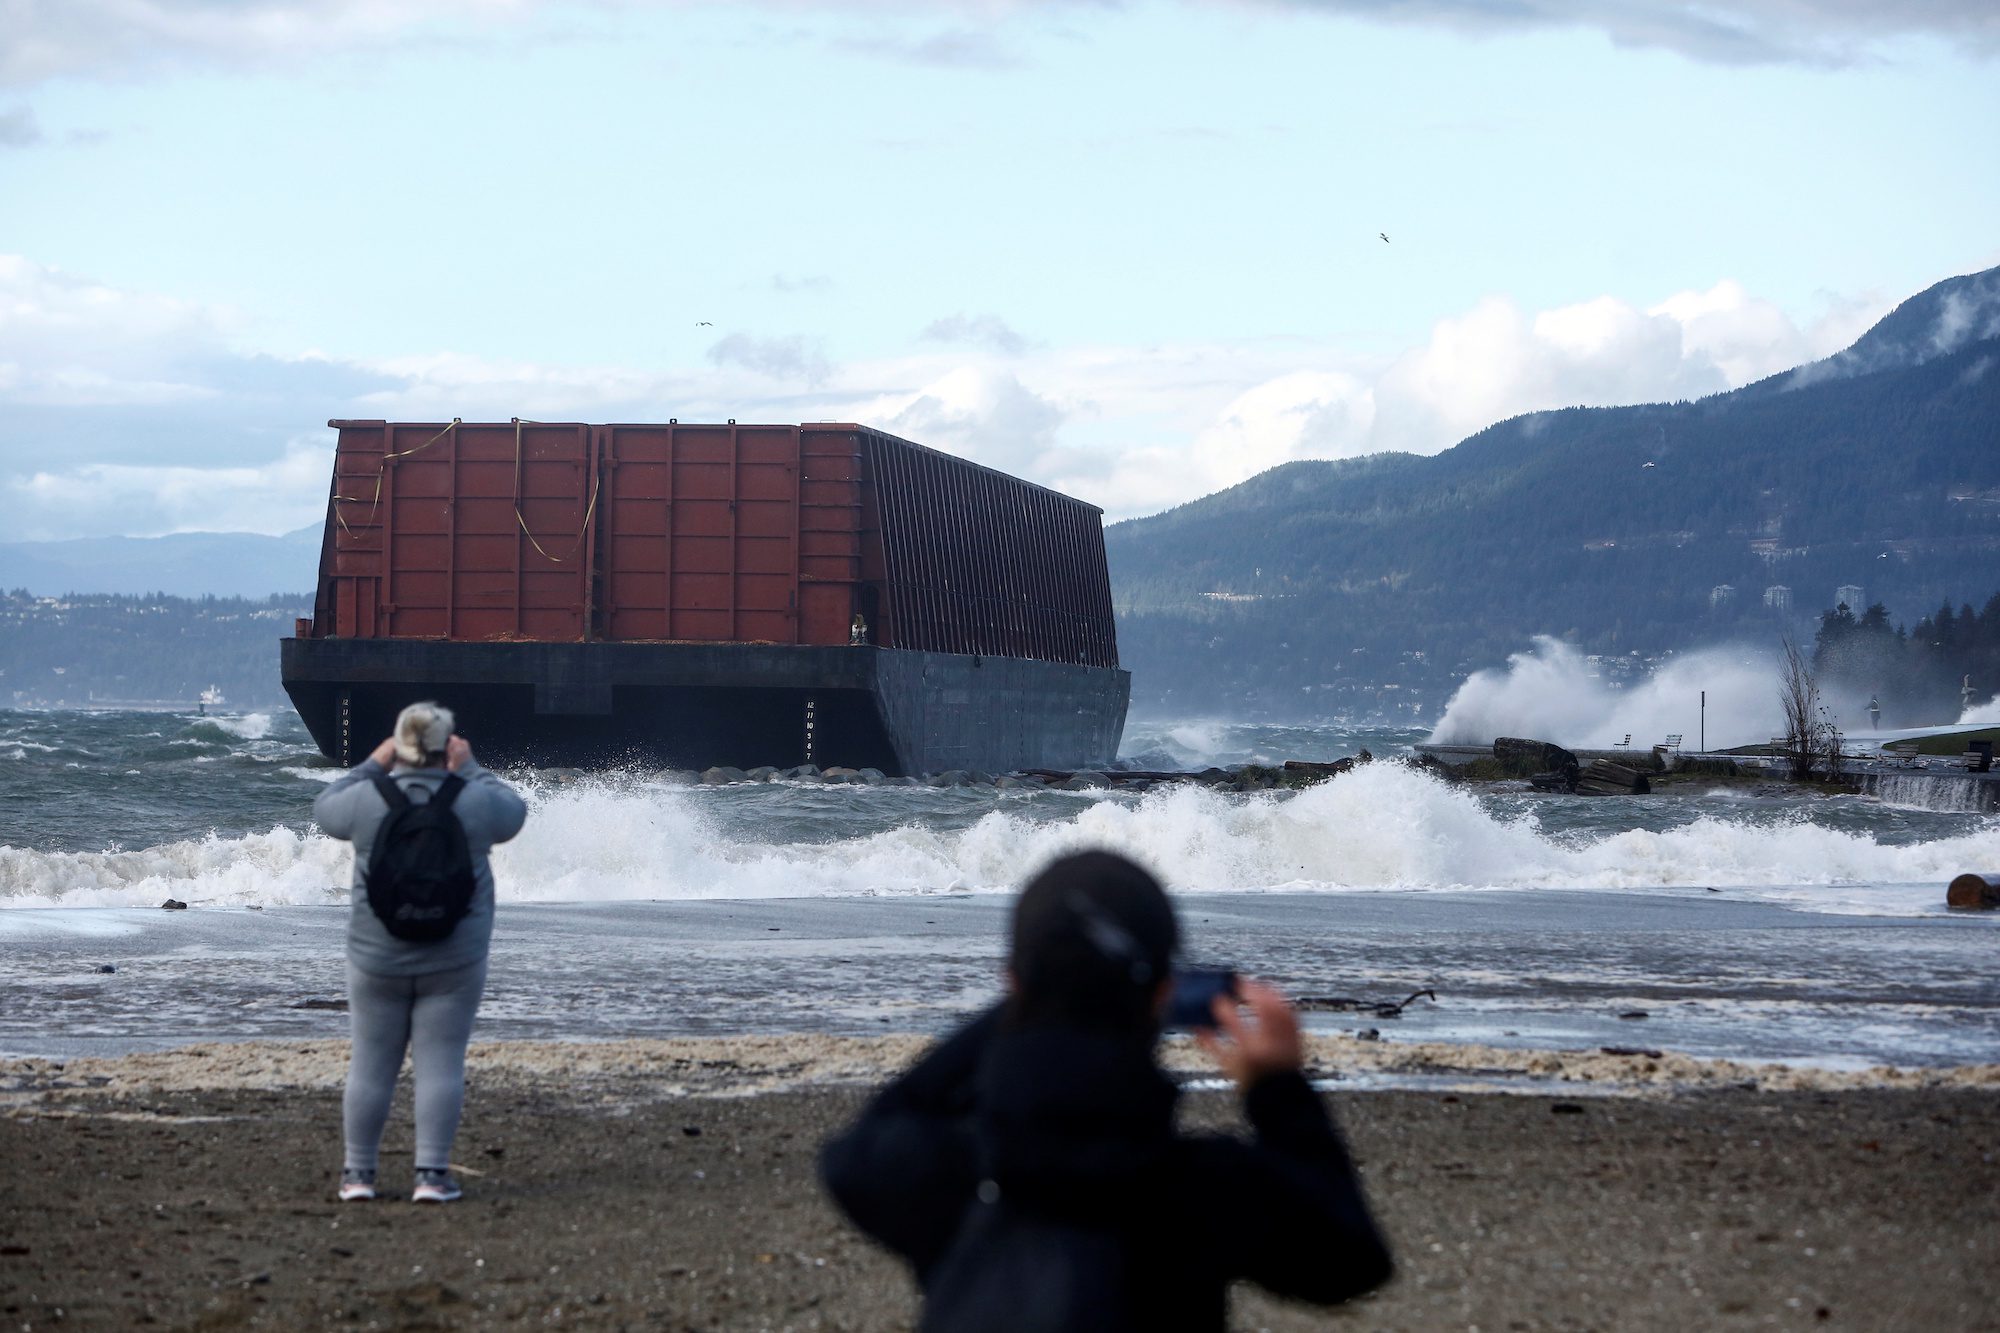 Flood Damage Cuts All Rail Access to Port of Vancouver, Canada’s Largest Port